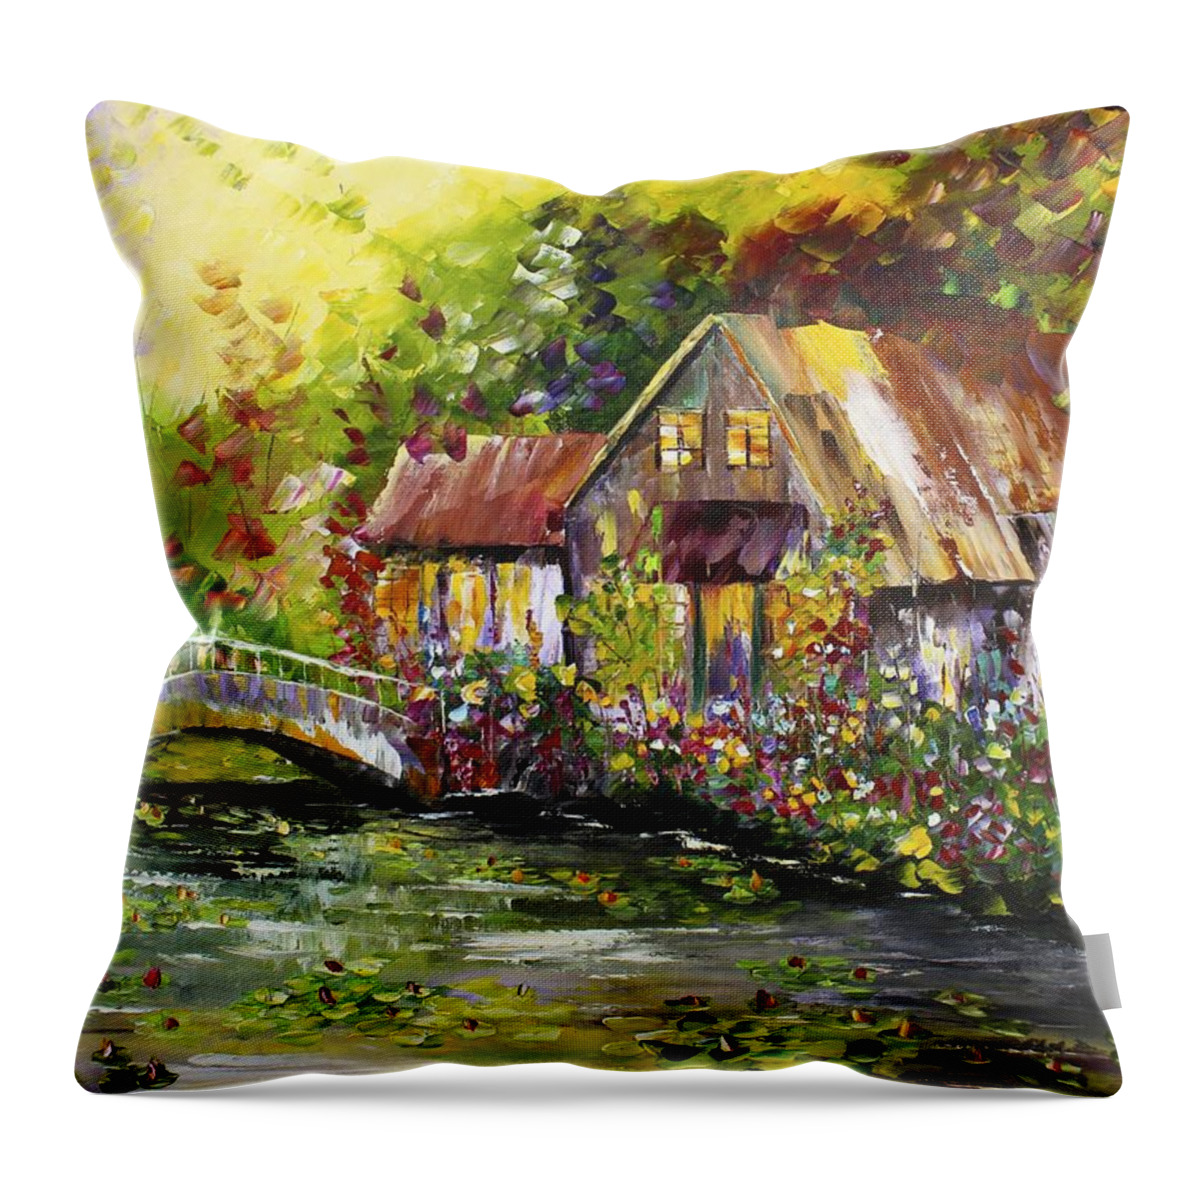 Waterfall Throw Pillow featuring the painting Spring Time by Kevin Brown